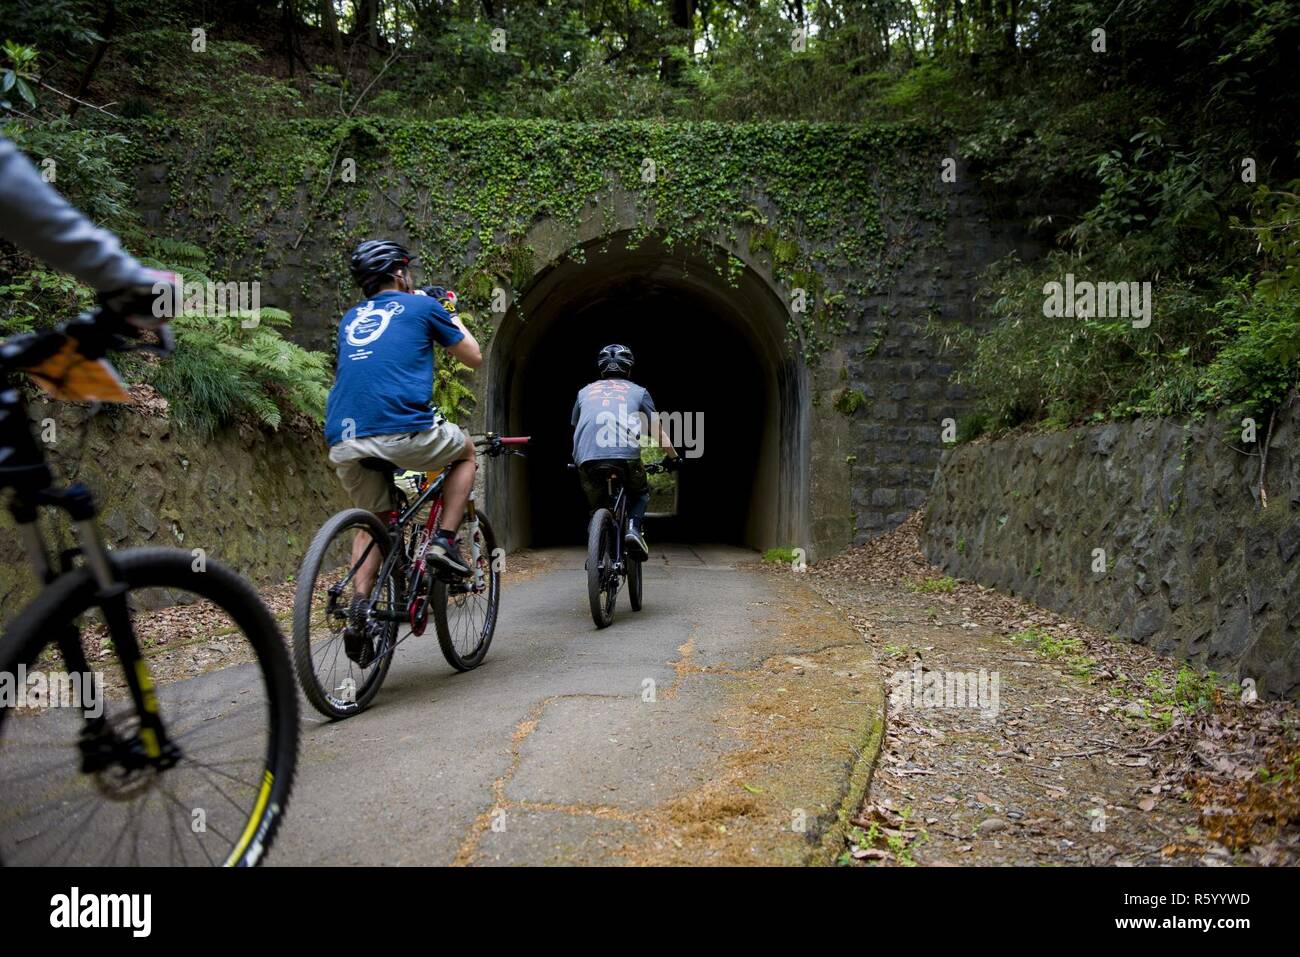 Participants in the Tour de Tama mountain bike race ride through a tunnel April 22, 2017, at Tama Hills Recreation Area, Japan. The course was approximately three miles in length and an approximate 3000 feet in combined elevation gain. Stock Photo